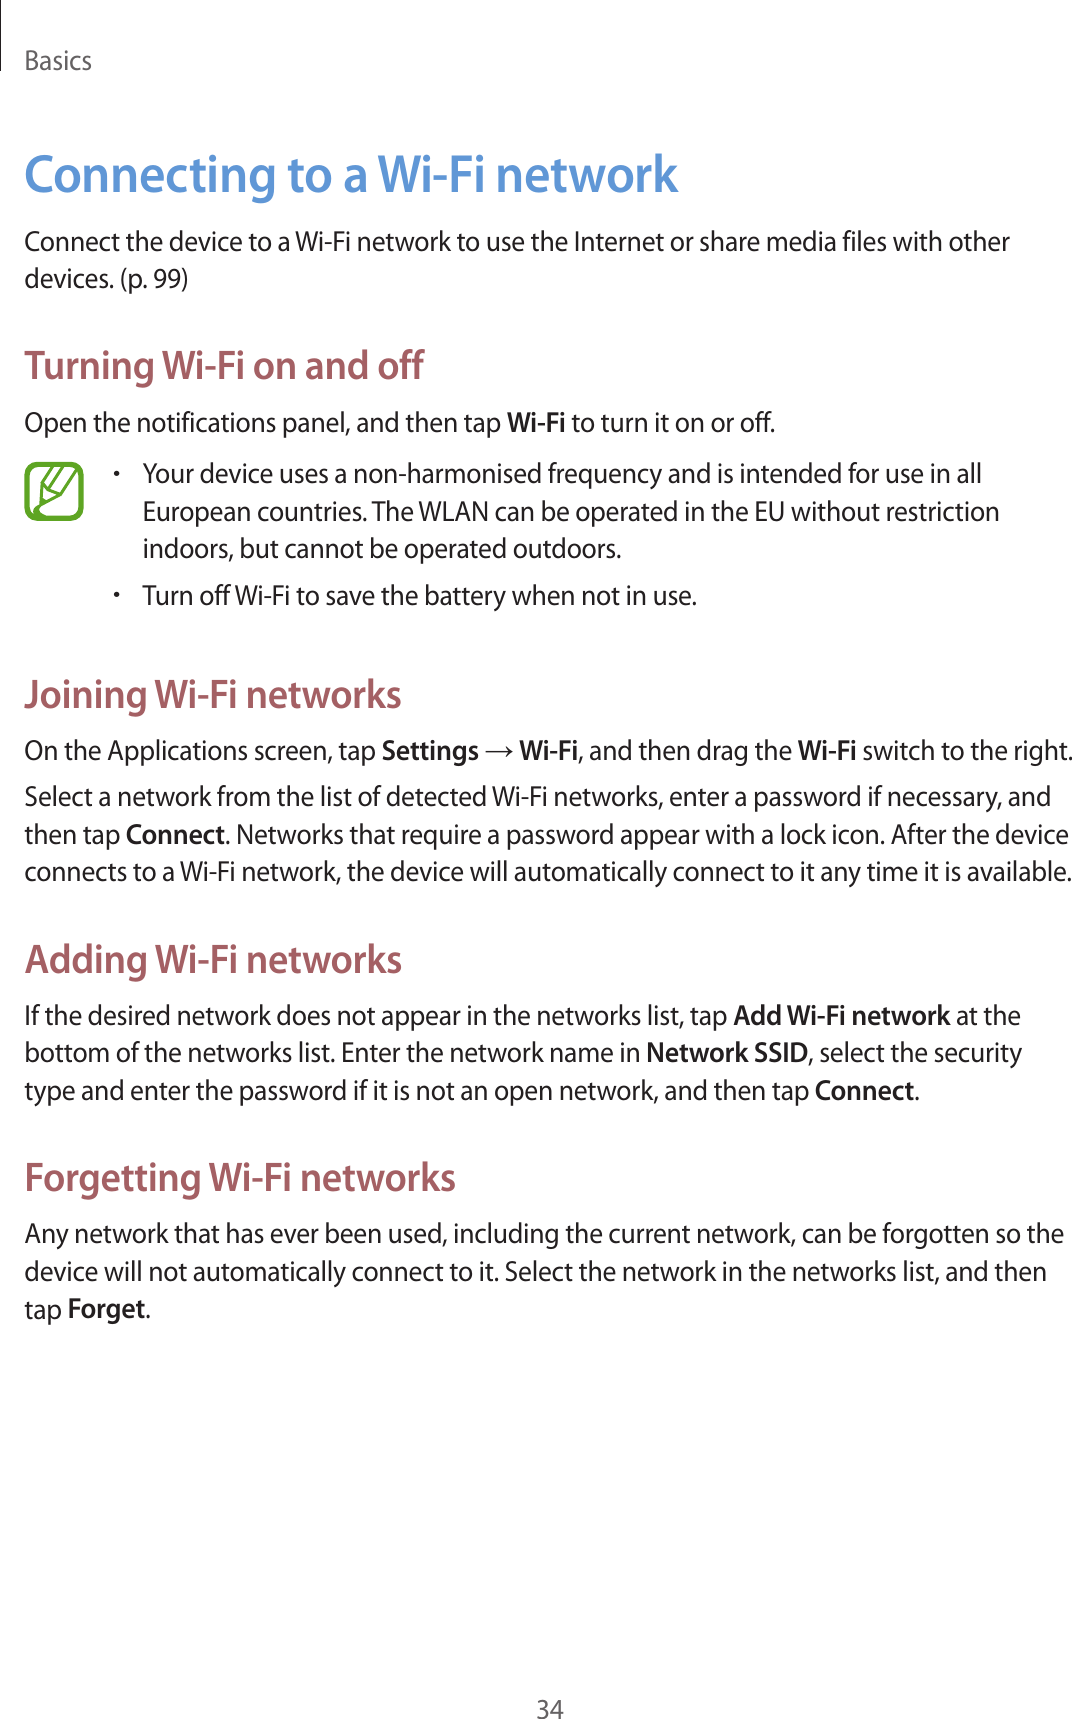 Basics34Connecting to a Wi-Fi networkConnect the device to a Wi-Fi network to use the Internet or share media files with other devices. (p. 99)Turning Wi-Fi on and offOpen the notifications panel, and then tap Wi-Fi to turn it on or off.•Your device uses a non-harmonised frequency and is intended for use in all European countries. The WLAN can be operated in the EU without restriction indoors, but cannot be operated outdoors.•Turn off Wi-Fi to save the battery when not in use.Joining Wi-Fi networksOn the Applications screen, tap Settings → Wi-Fi, and then drag the Wi-Fi switch to the right.Select a network from the list of detected Wi-Fi networks, enter a password if necessary, and then tap Connect. Networks that require a password appear with a lock icon. After the device connects to a Wi-Fi network, the device will automatically connect to it any time it is available.Adding Wi-Fi networksIf the desired network does not appear in the networks list, tap Add Wi-Fi network at the bottom of the networks list. Enter the network name in Network SSID, select the security type and enter the password if it is not an open network, and then tap Connect.Forgetting Wi-Fi networksAny network that has ever been used, including the current network, can be forgotten so the device will not automatically connect to it. Select the network in the networks list, and then tap Forget.